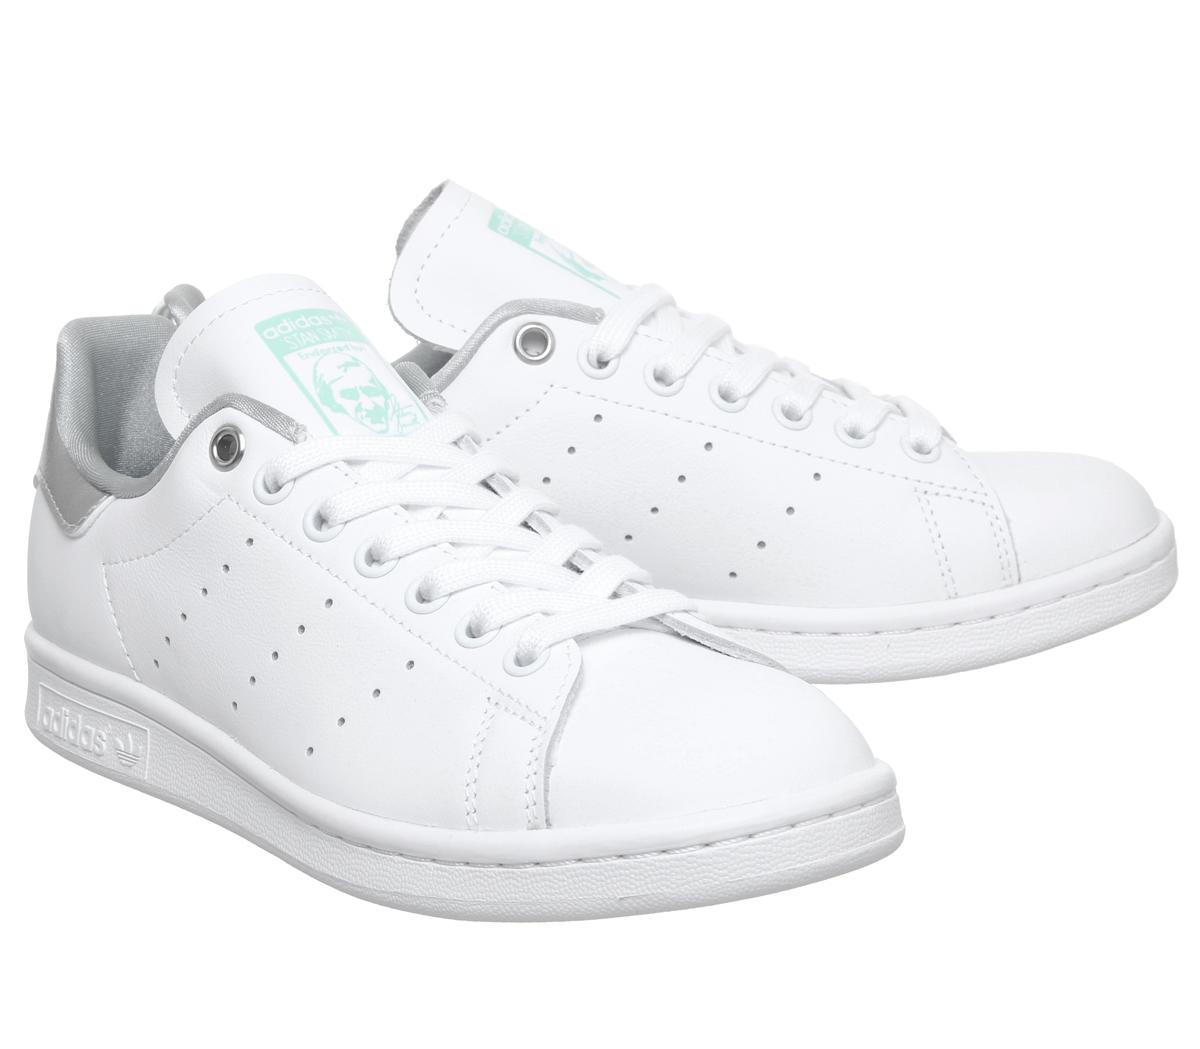 adidas Stan Smith Trainers White Silver Metallic - Hers trainers